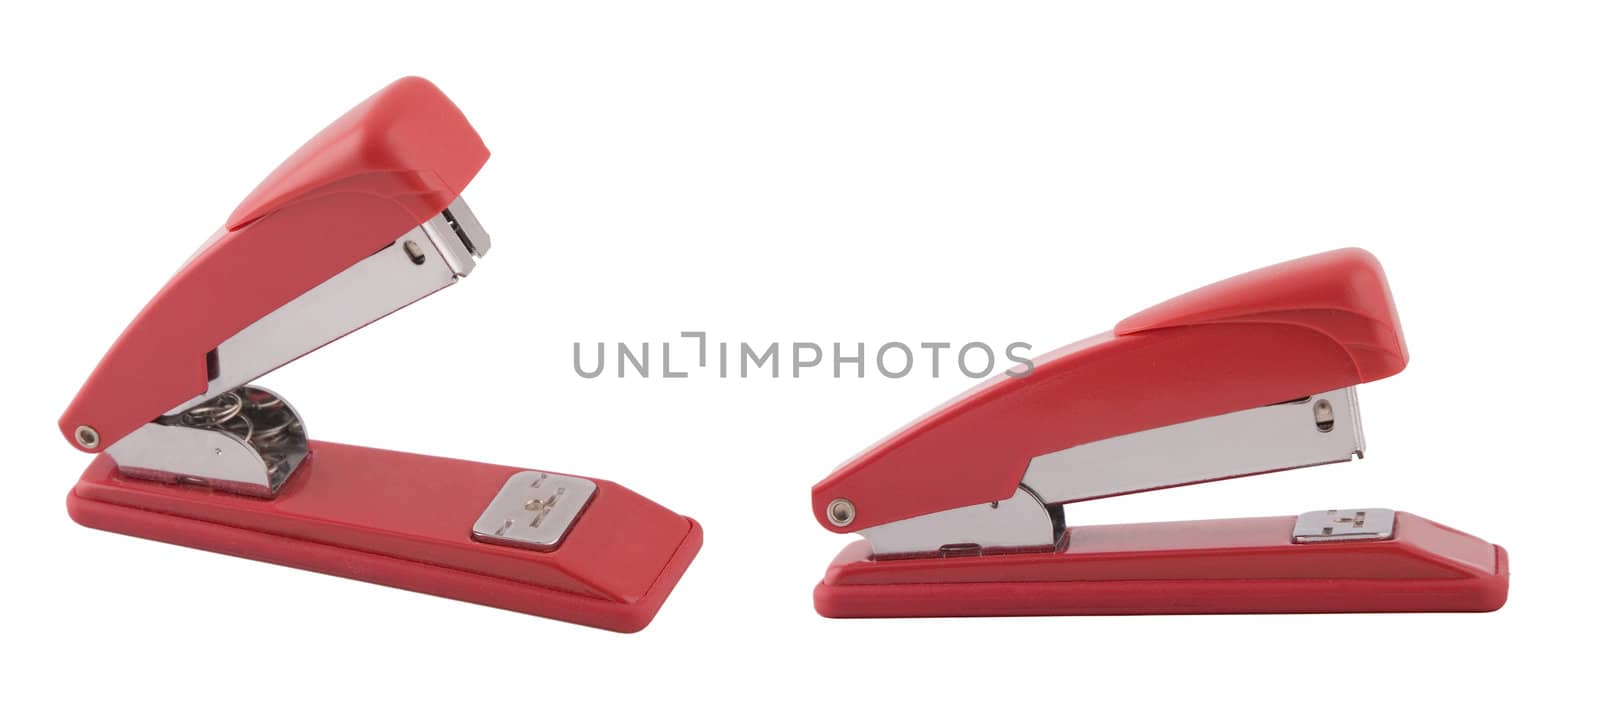 two point of view of red stapler on white background